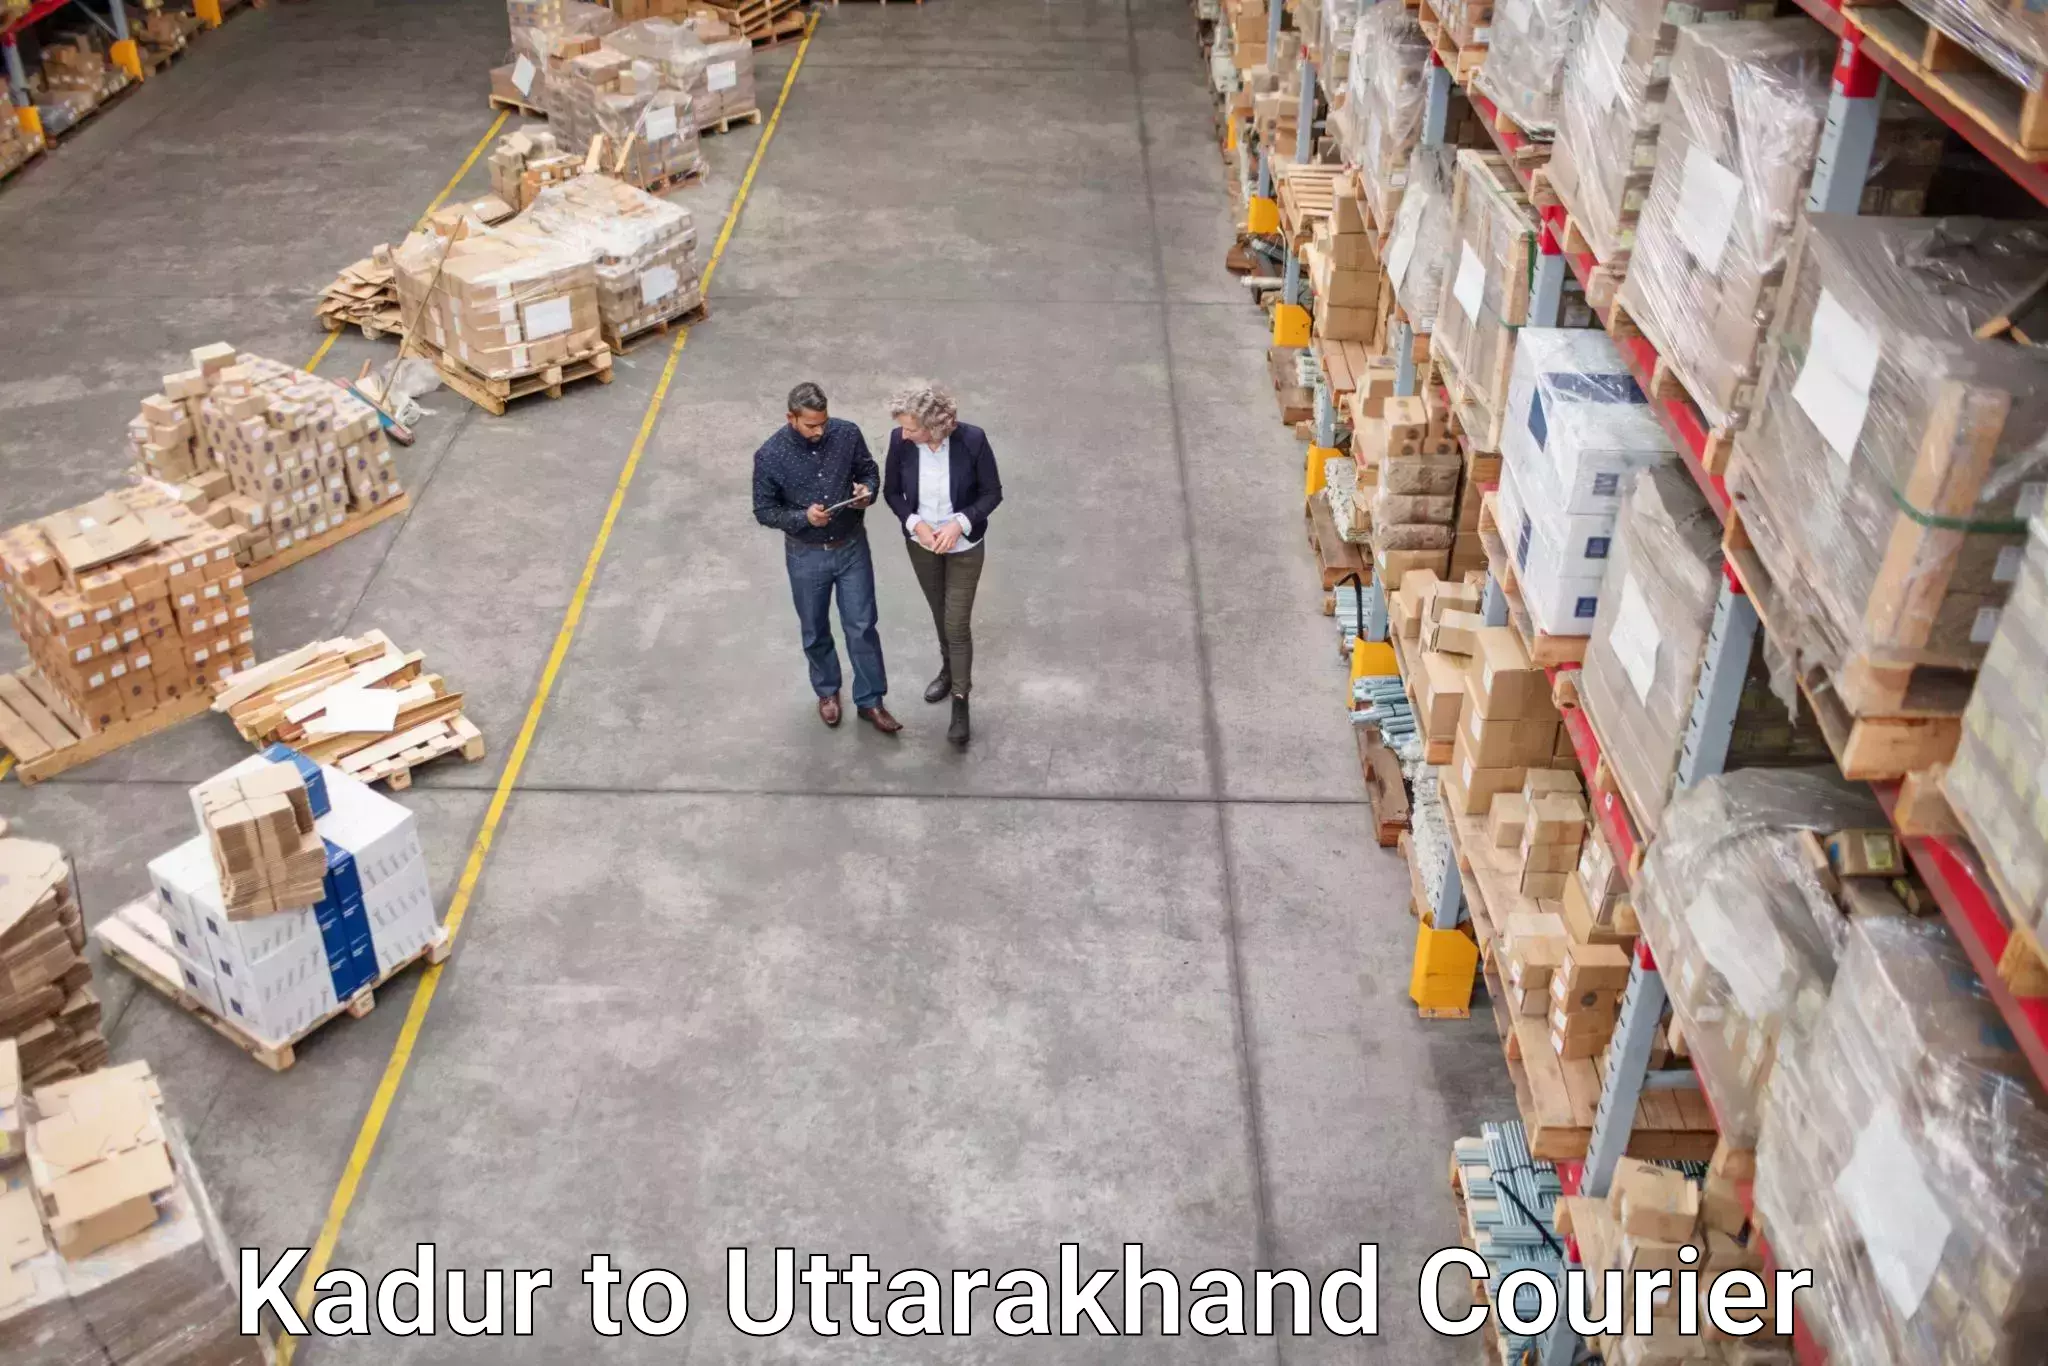 State-of-the-art courier technology Kadur to Lansdowne